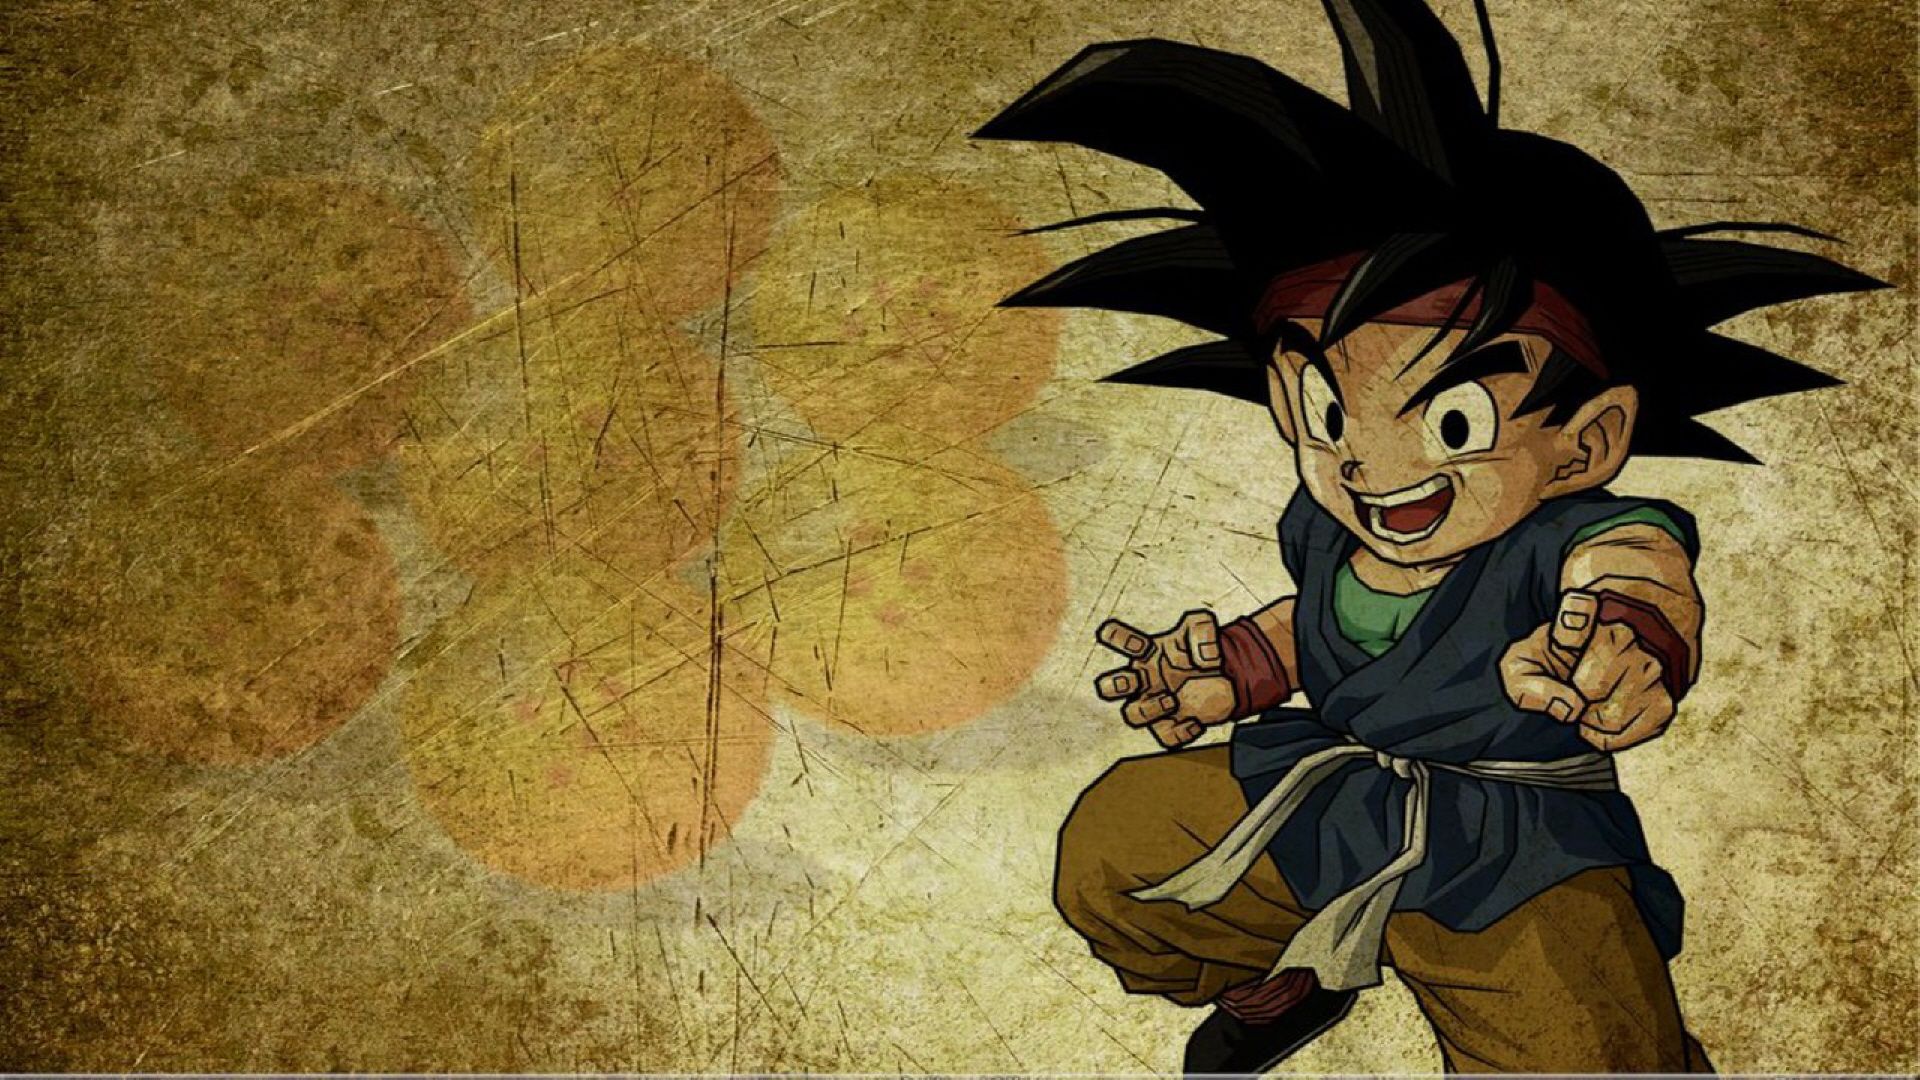 Dragon Ball Z Wallpapers Goku | Wallpapers, Backgrounds, Images ...